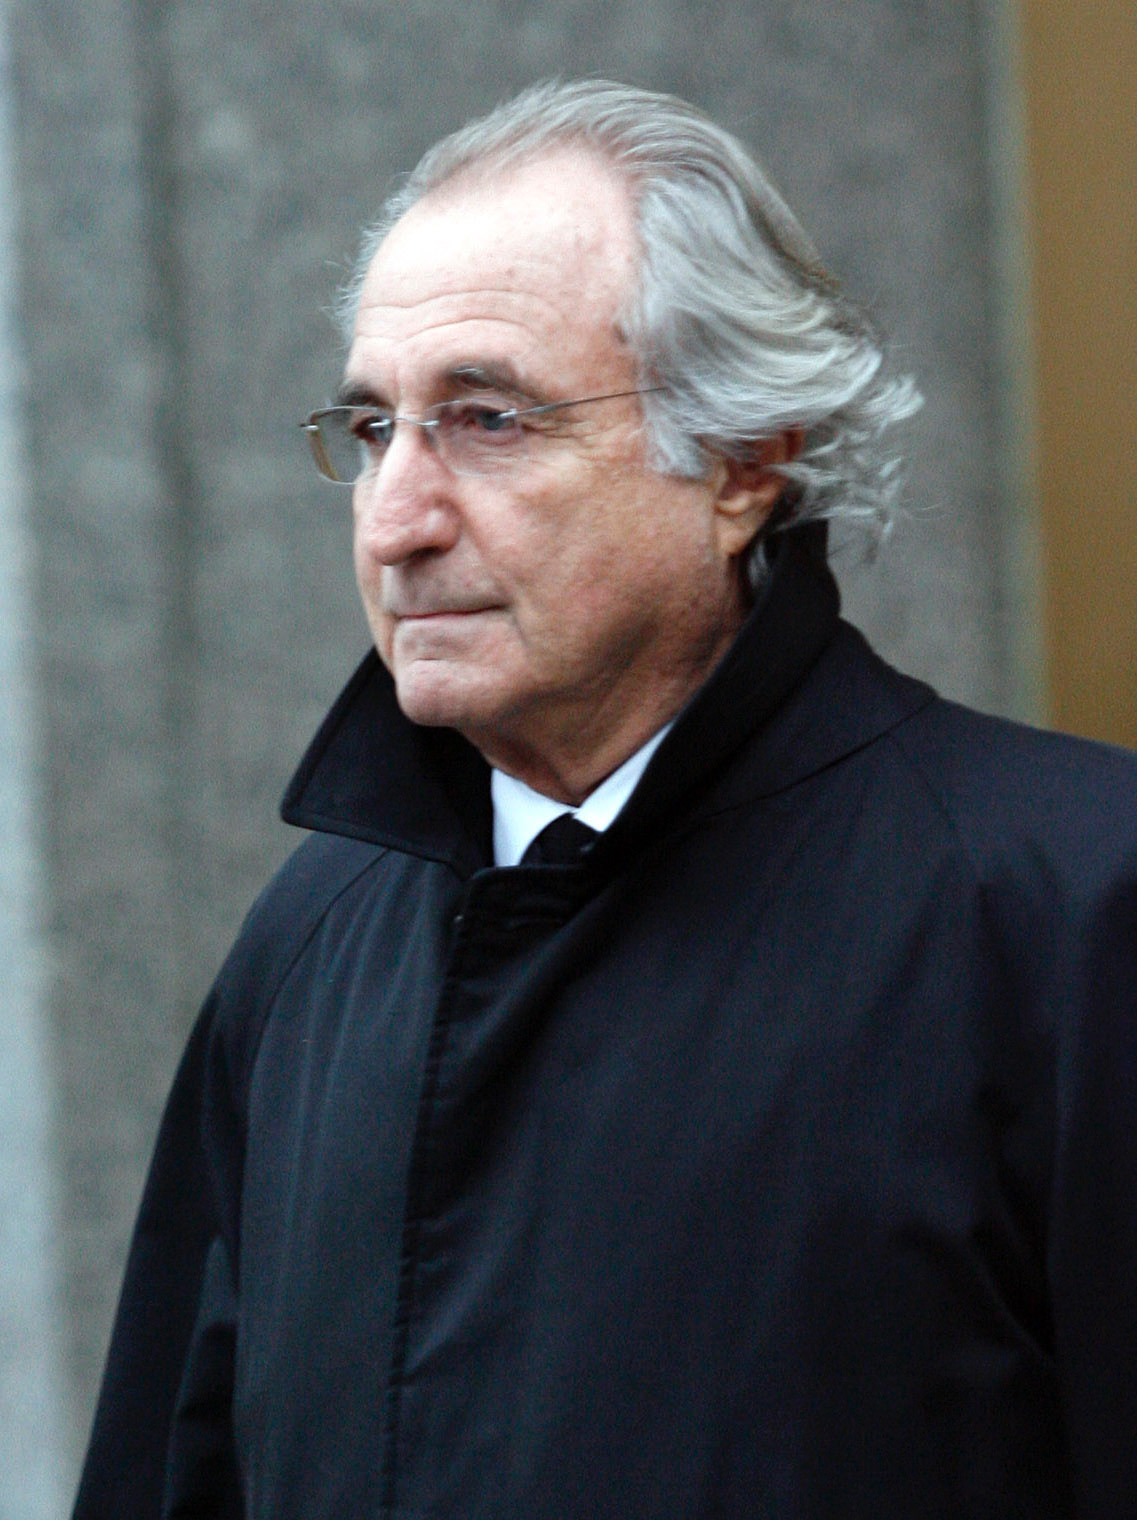 urce: Ponzi schemer Bernie Madoff has died in a federal prison, believed to  be from natural causes